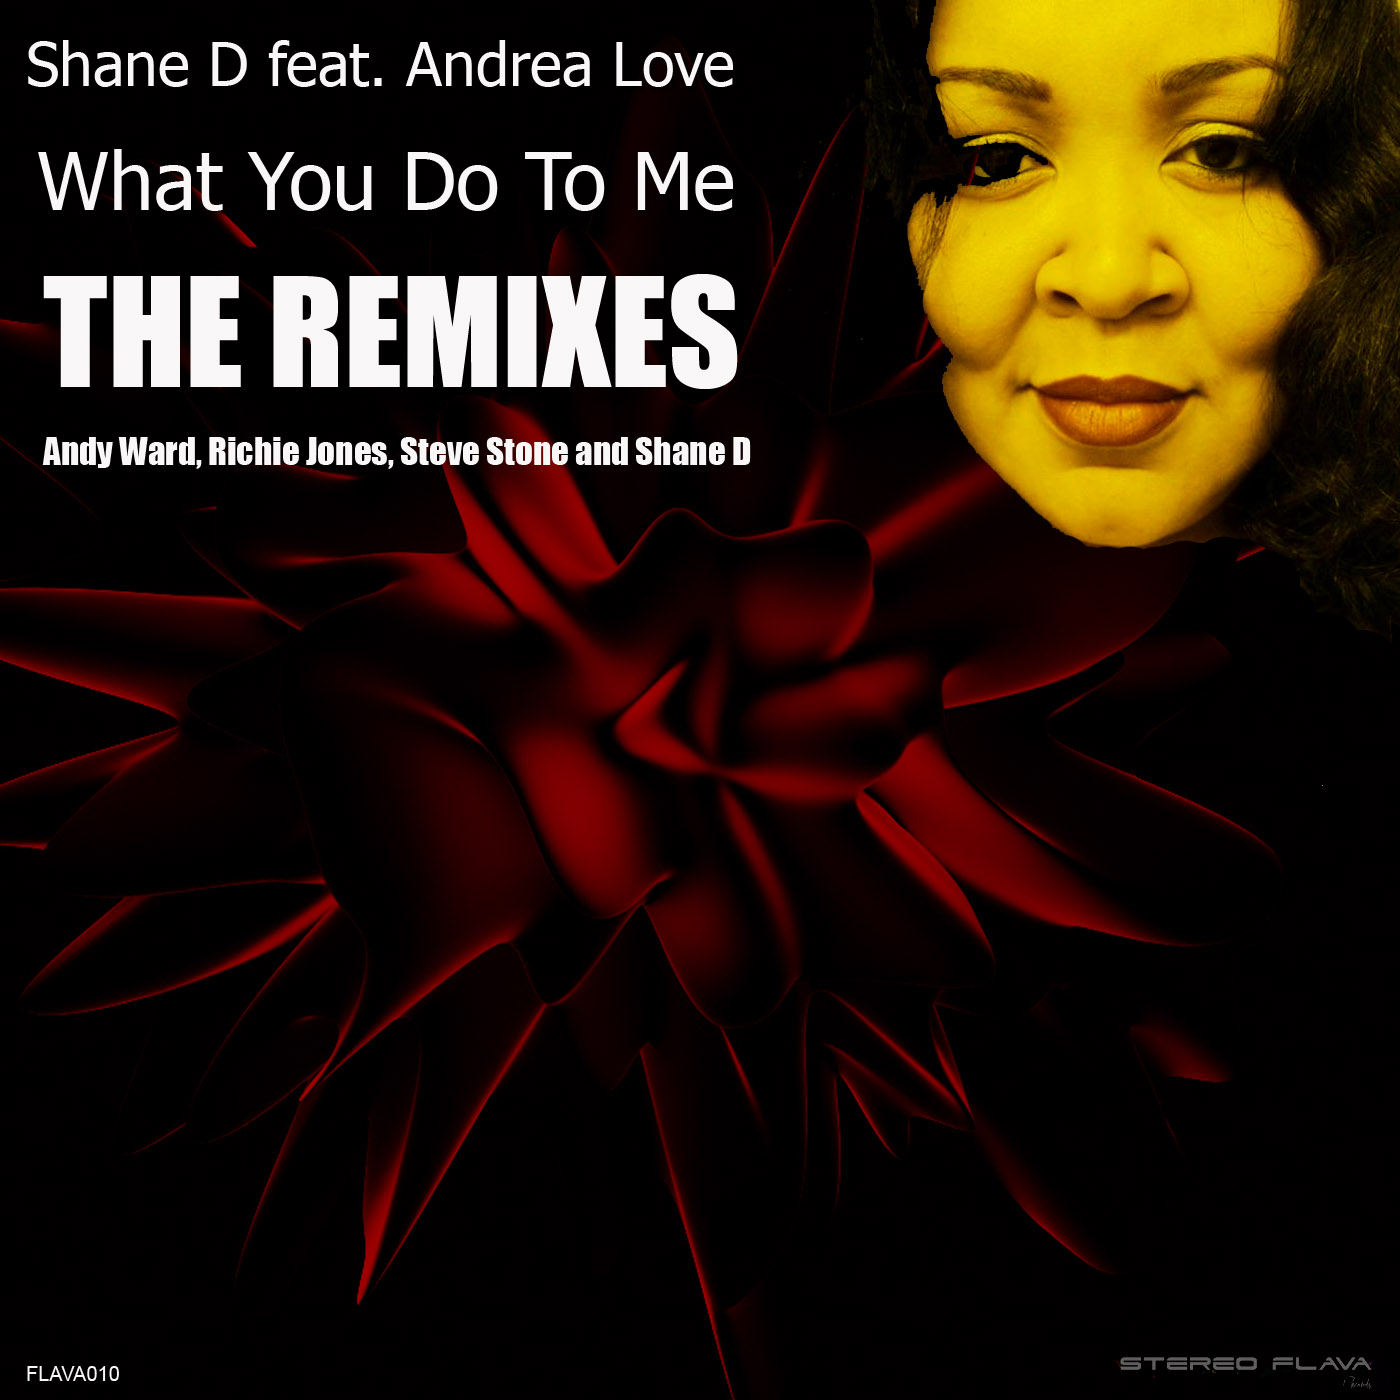 Shane D feat. Andrea Love - What You Do To Me (Remixes)